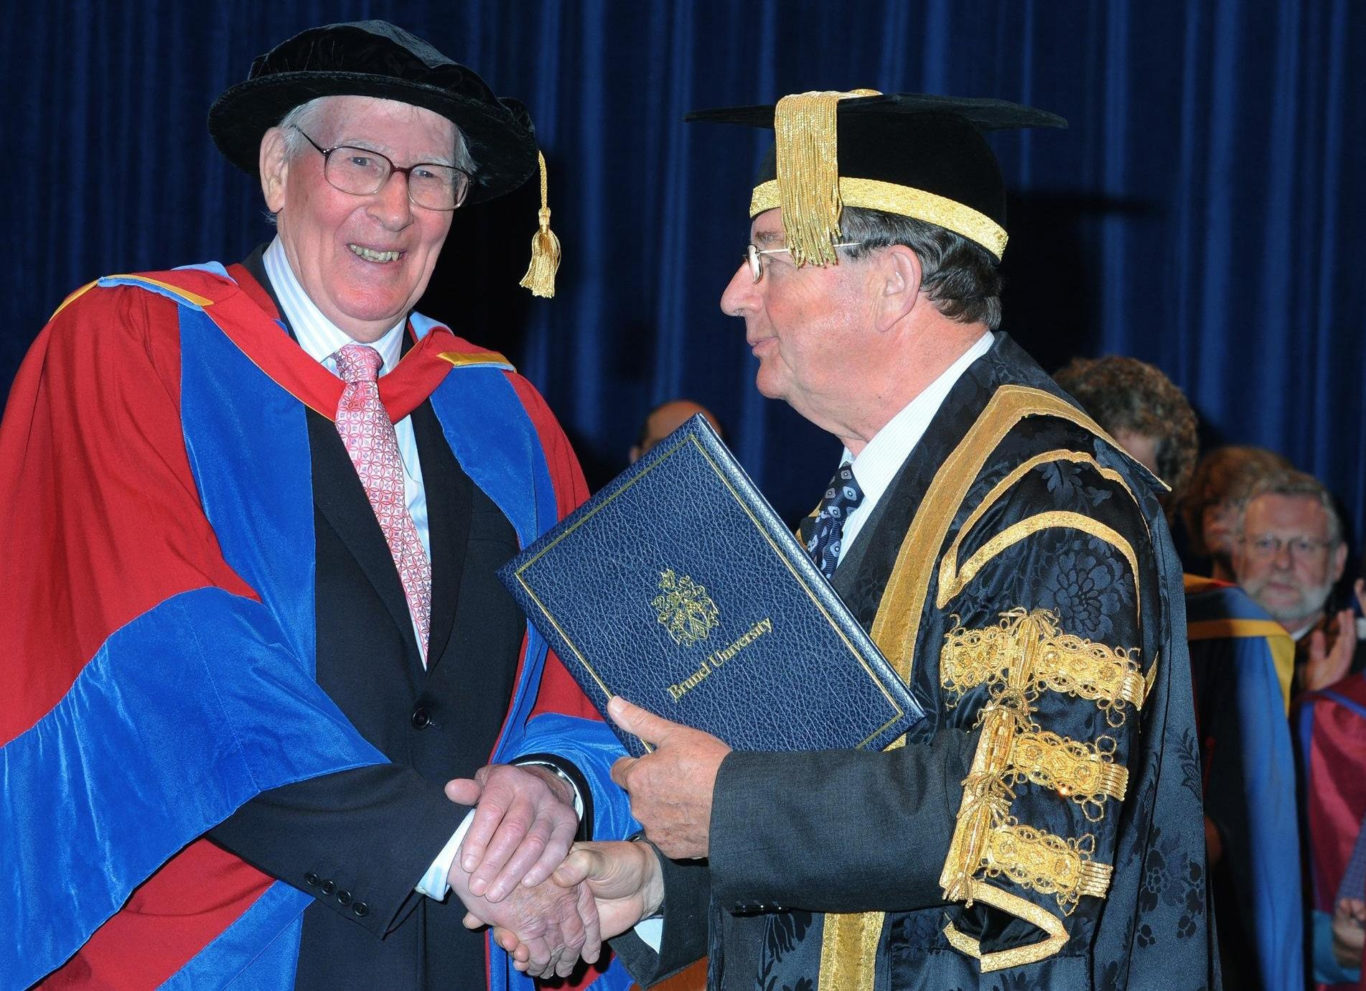 Sir Roger received an honorary degree of Doctor of the University from Brunel University (Brunel University/PA)